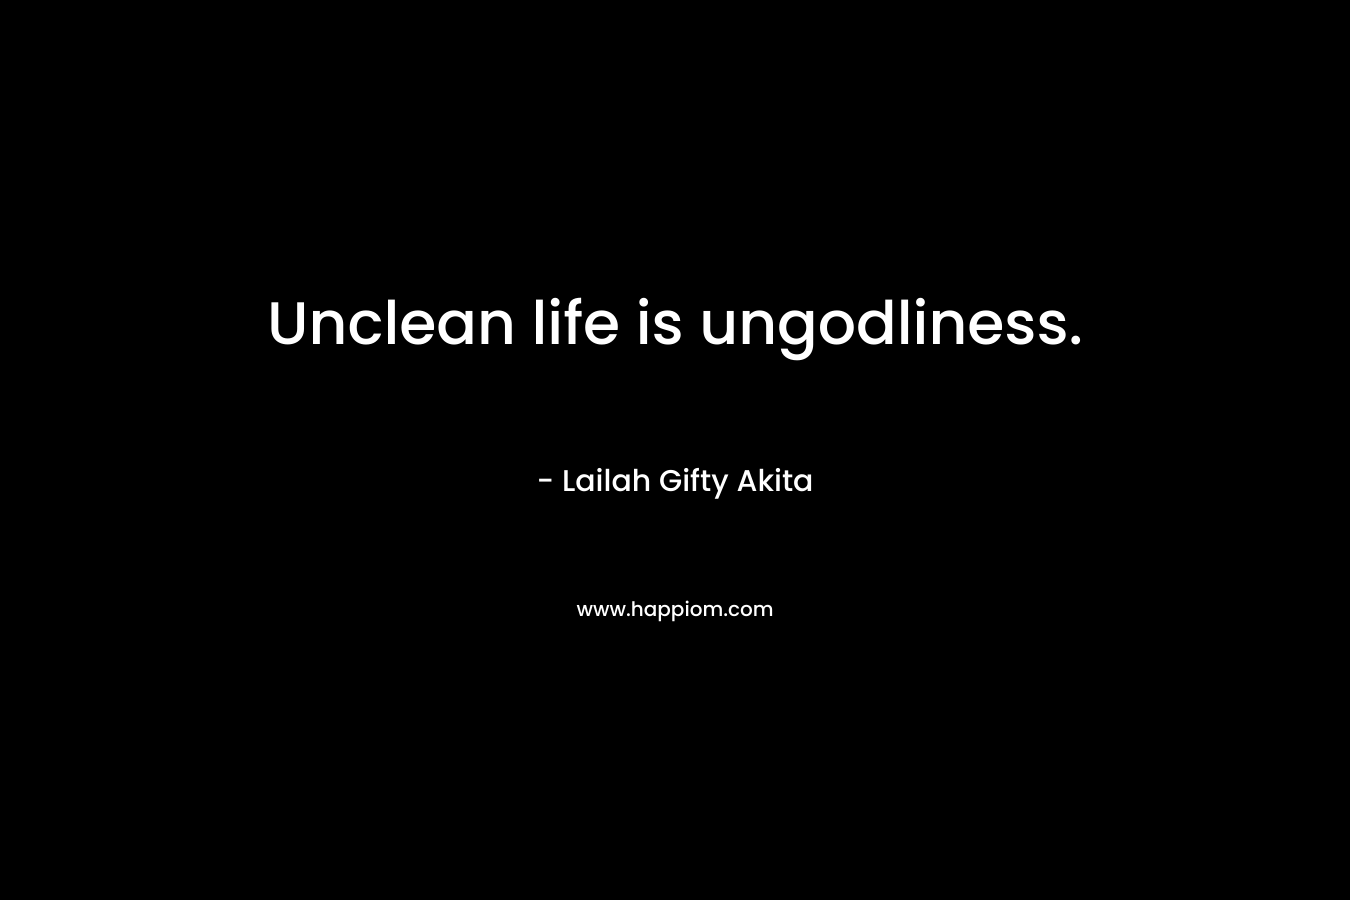 Unclean life is ungodliness. – Lailah Gifty Akita